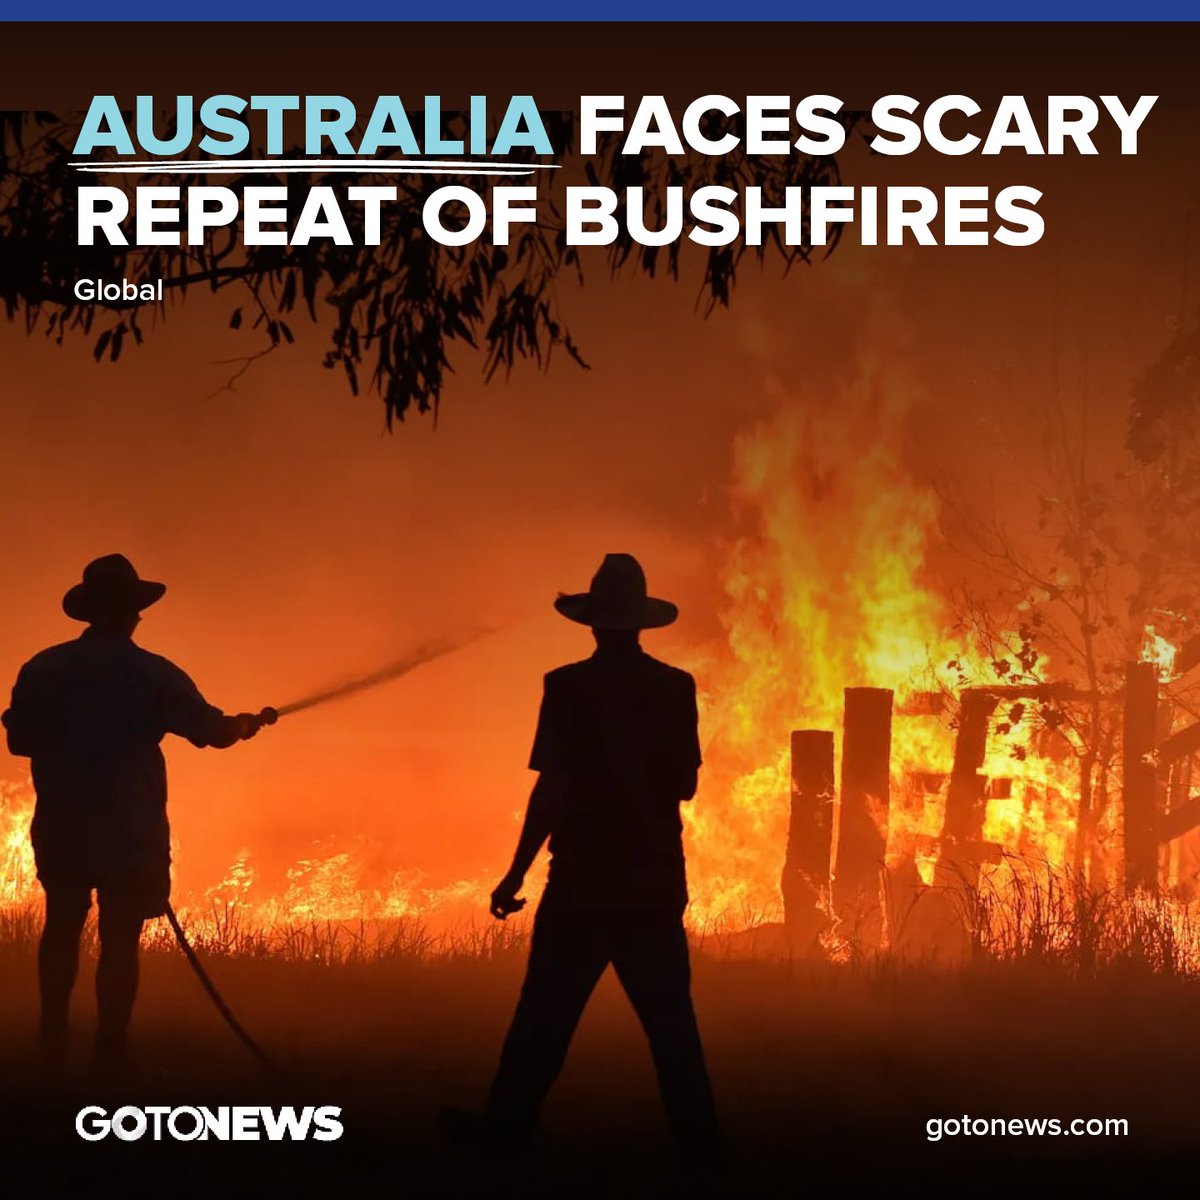 77 fires are currently burning along the New South Wales coast, with 35 remaining uncontained. 
gotonews.com
#australia #australianbushfires #australiabushfires #naturaldisasters #firefighters #gotonews